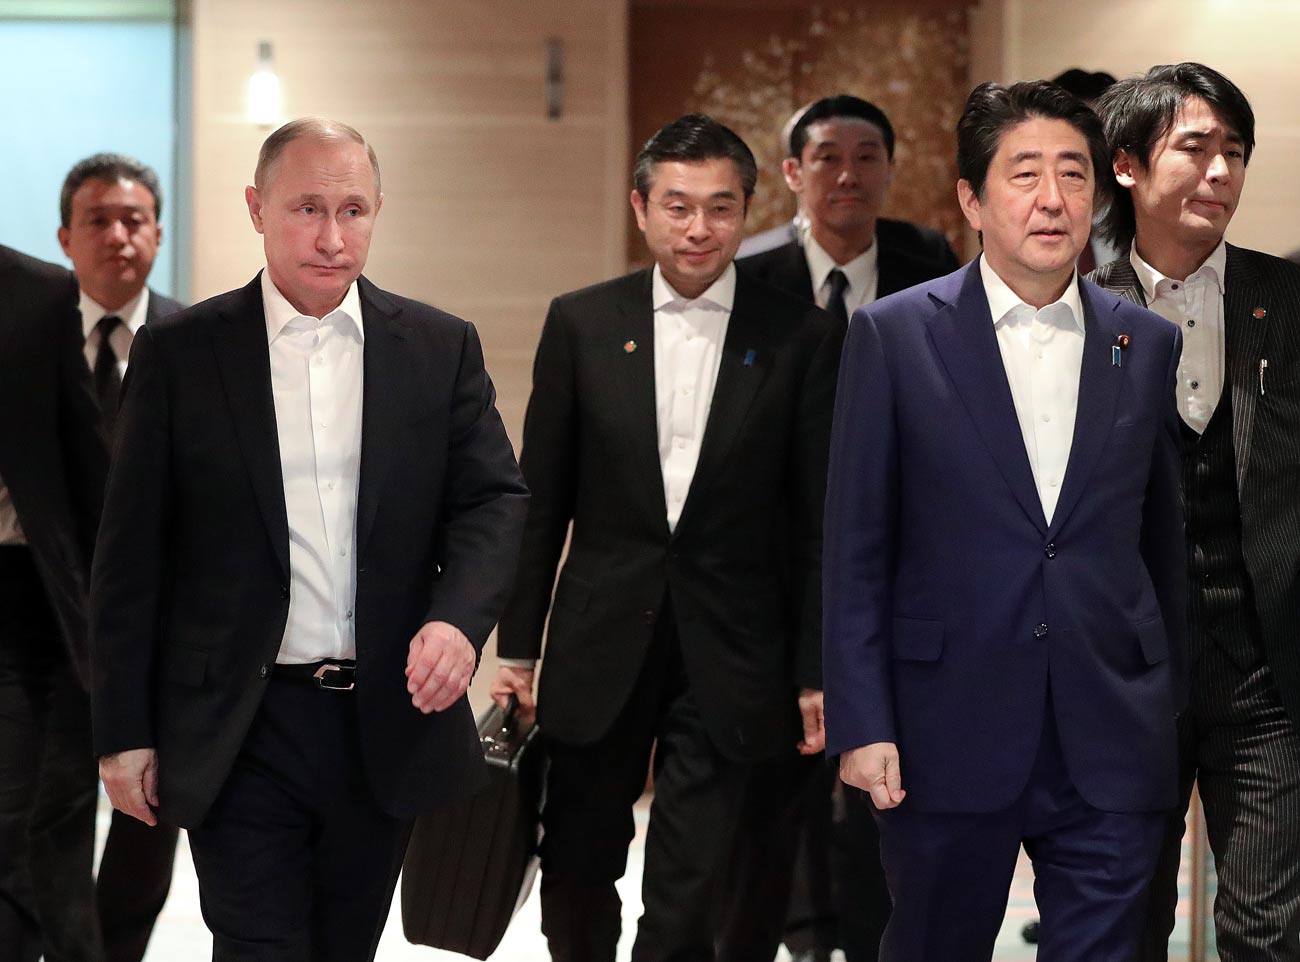 Russian President Vladimir Putin and Japanese Prime Minister Shinzo Abe, front, right, durong a meeting in Nagato, Yamaguchi Prefecture